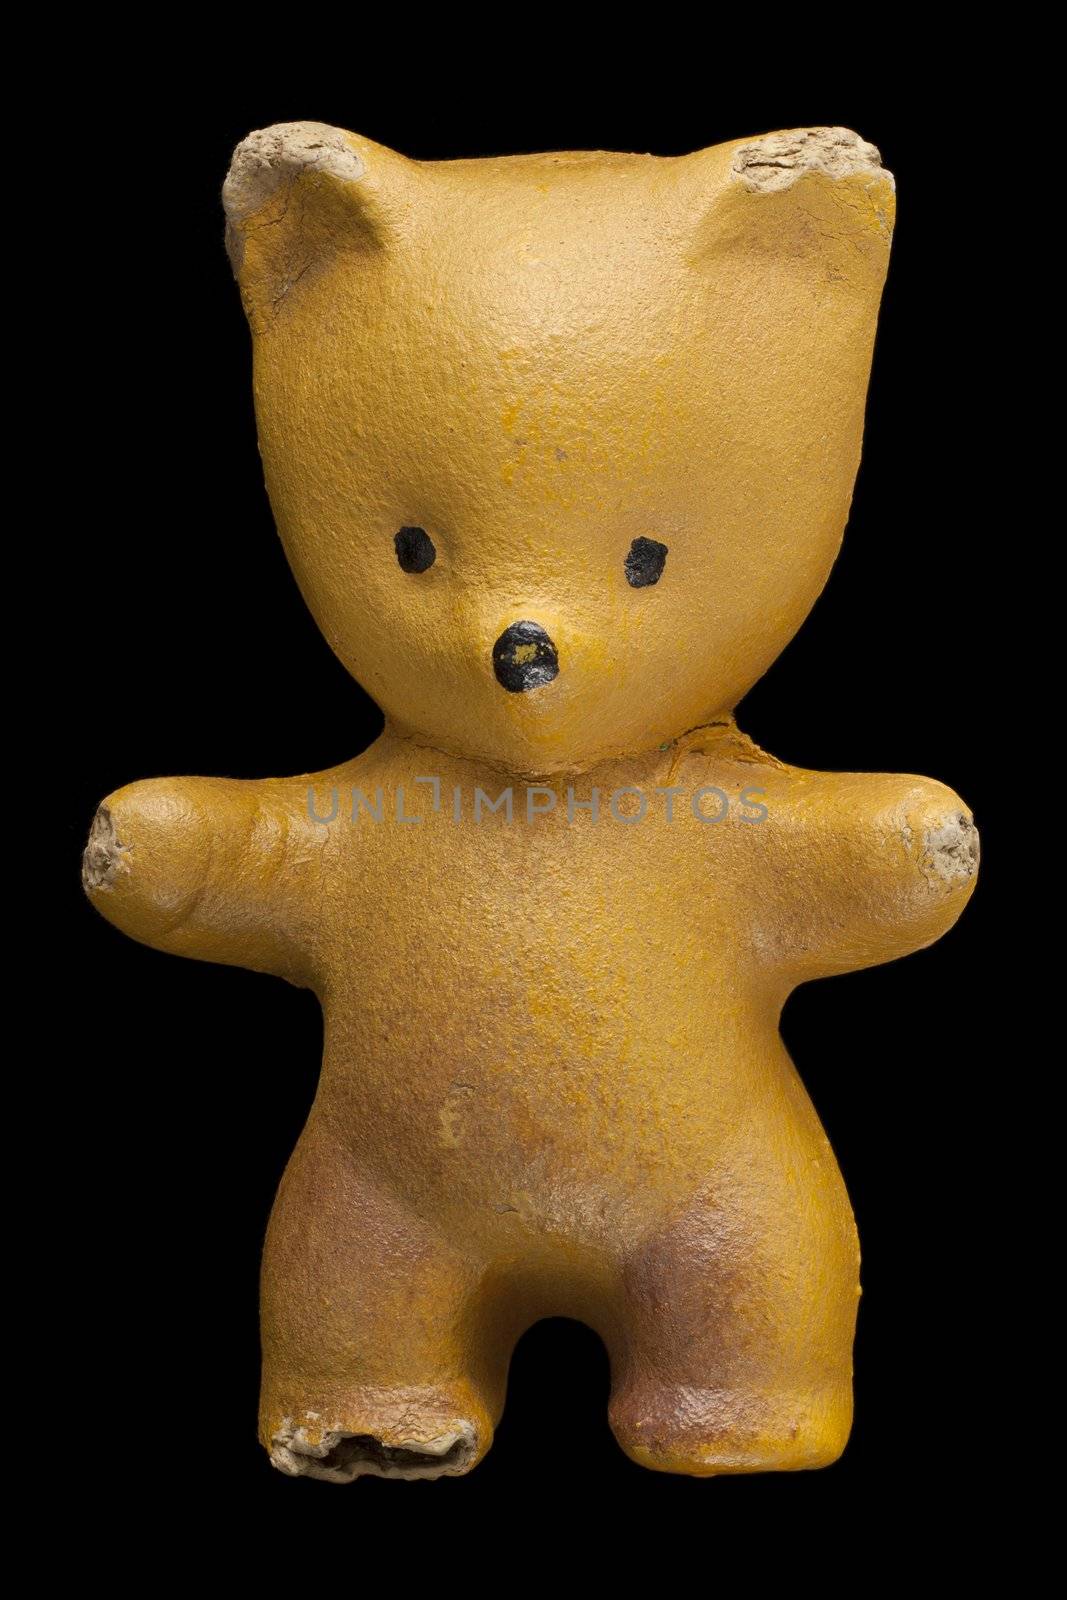 Old yellow teddy bear by andrius